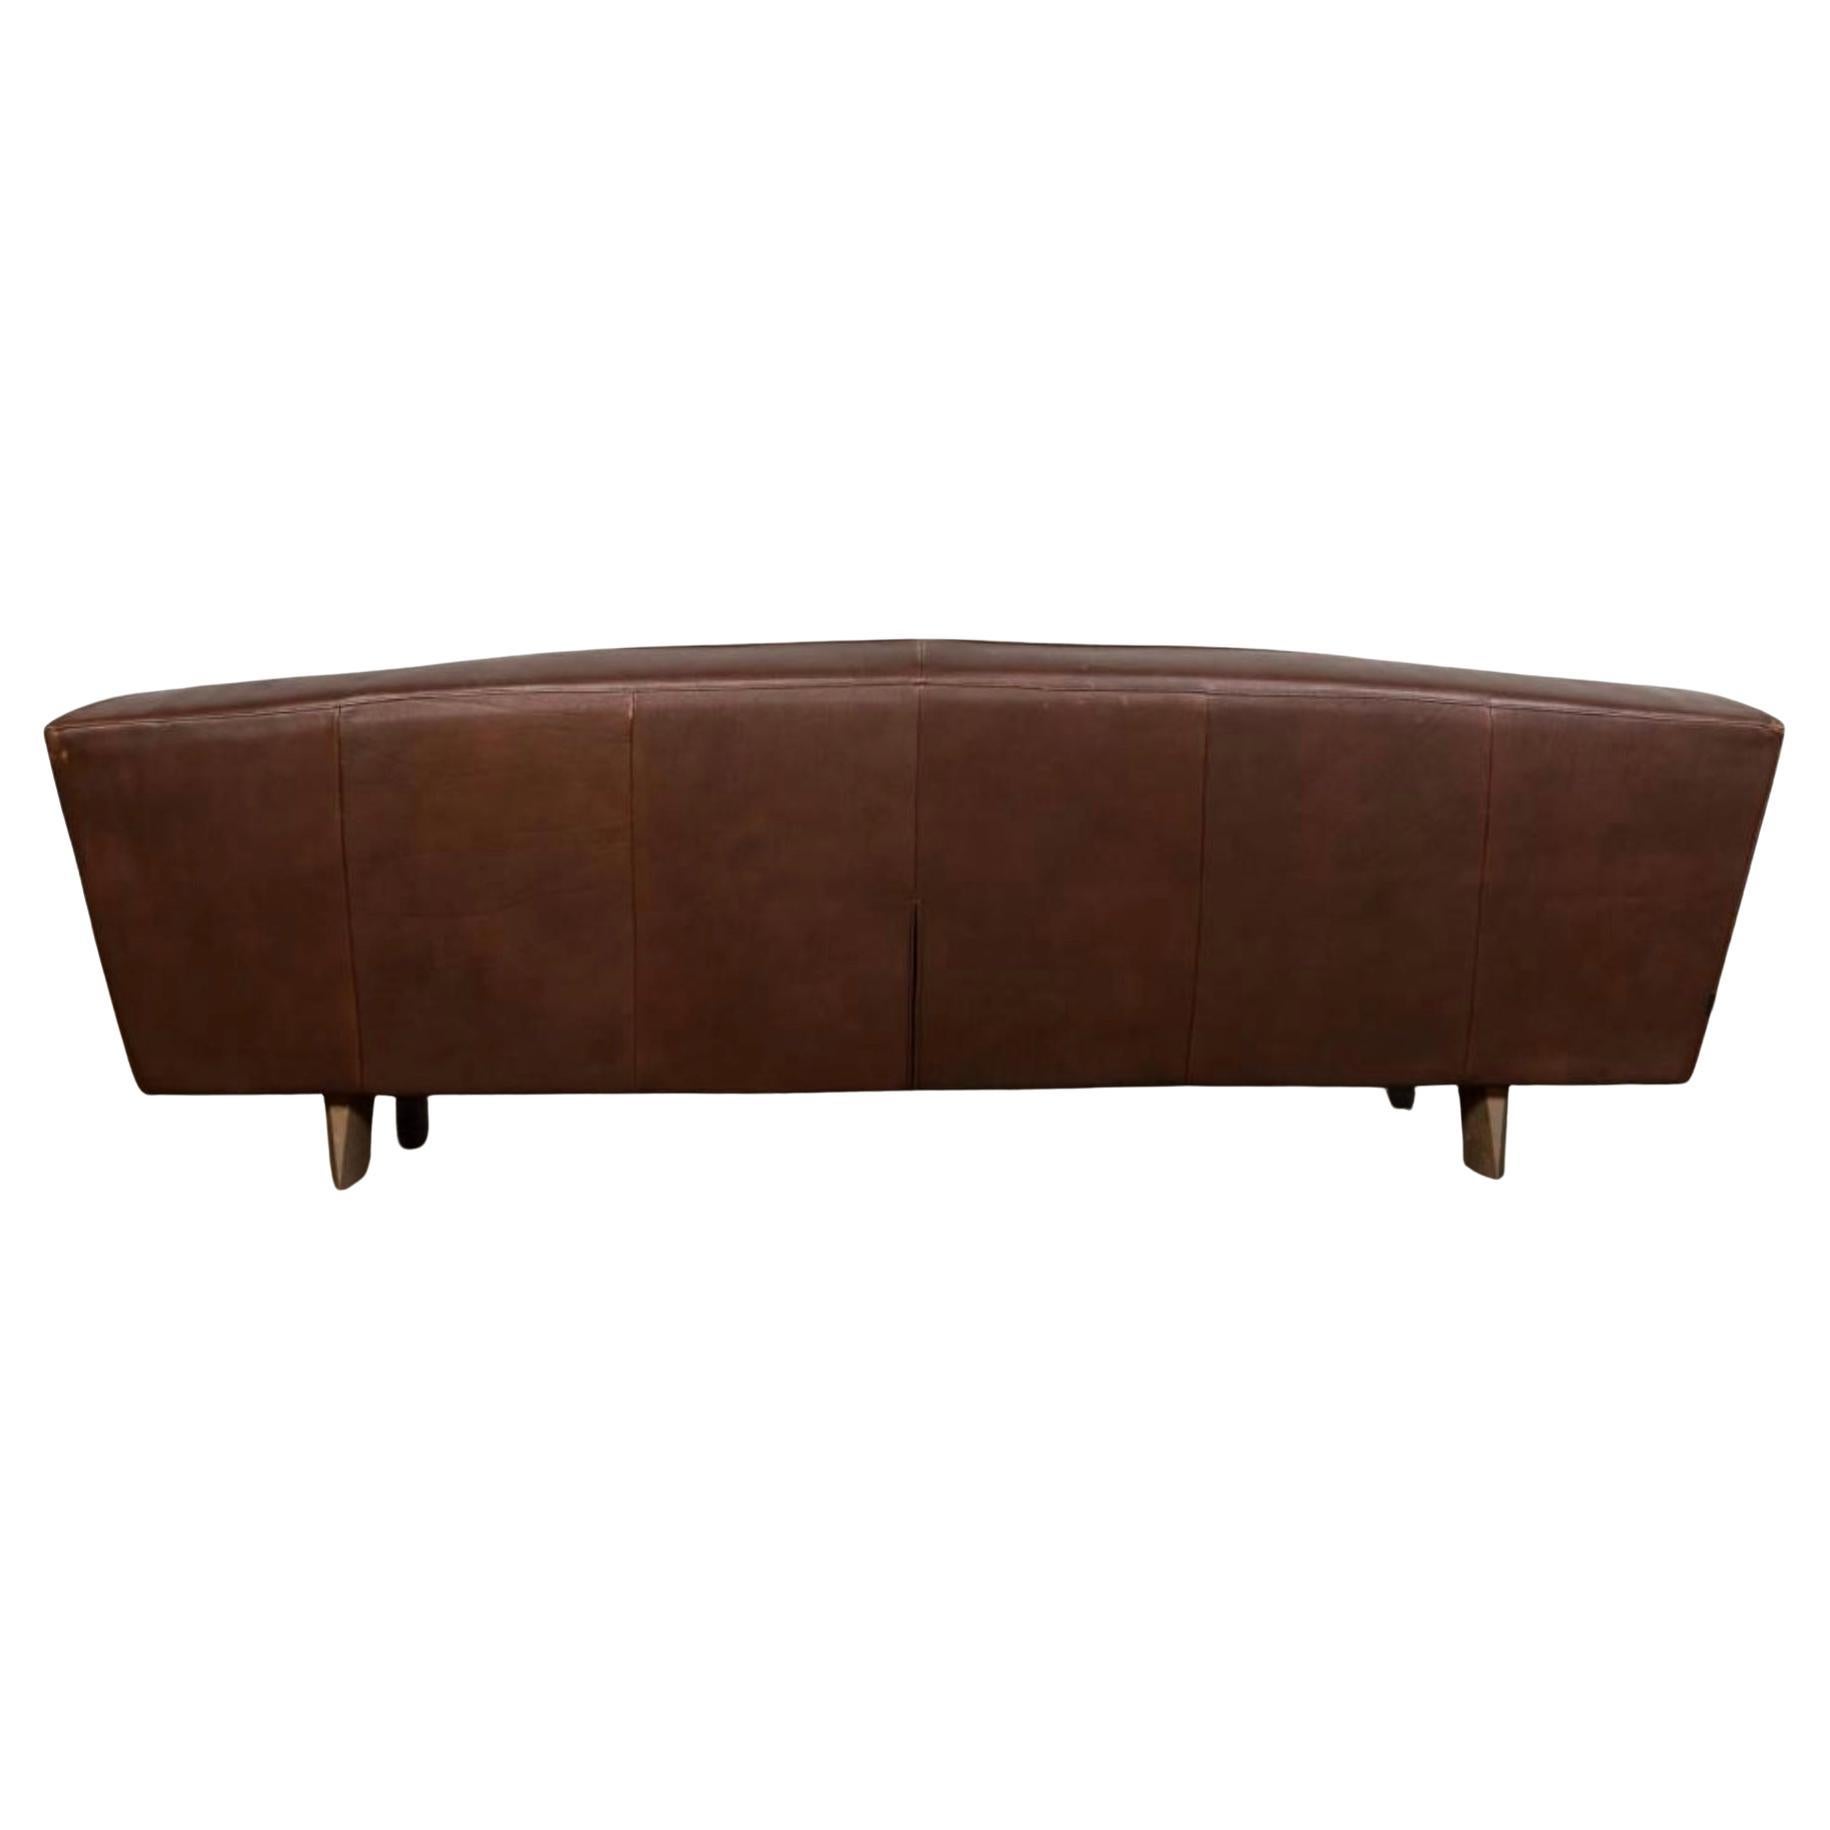 Dutch Scandinavian Vintage Modern Low Brown leather 3 seat sofa by Montis in Holland For Sale